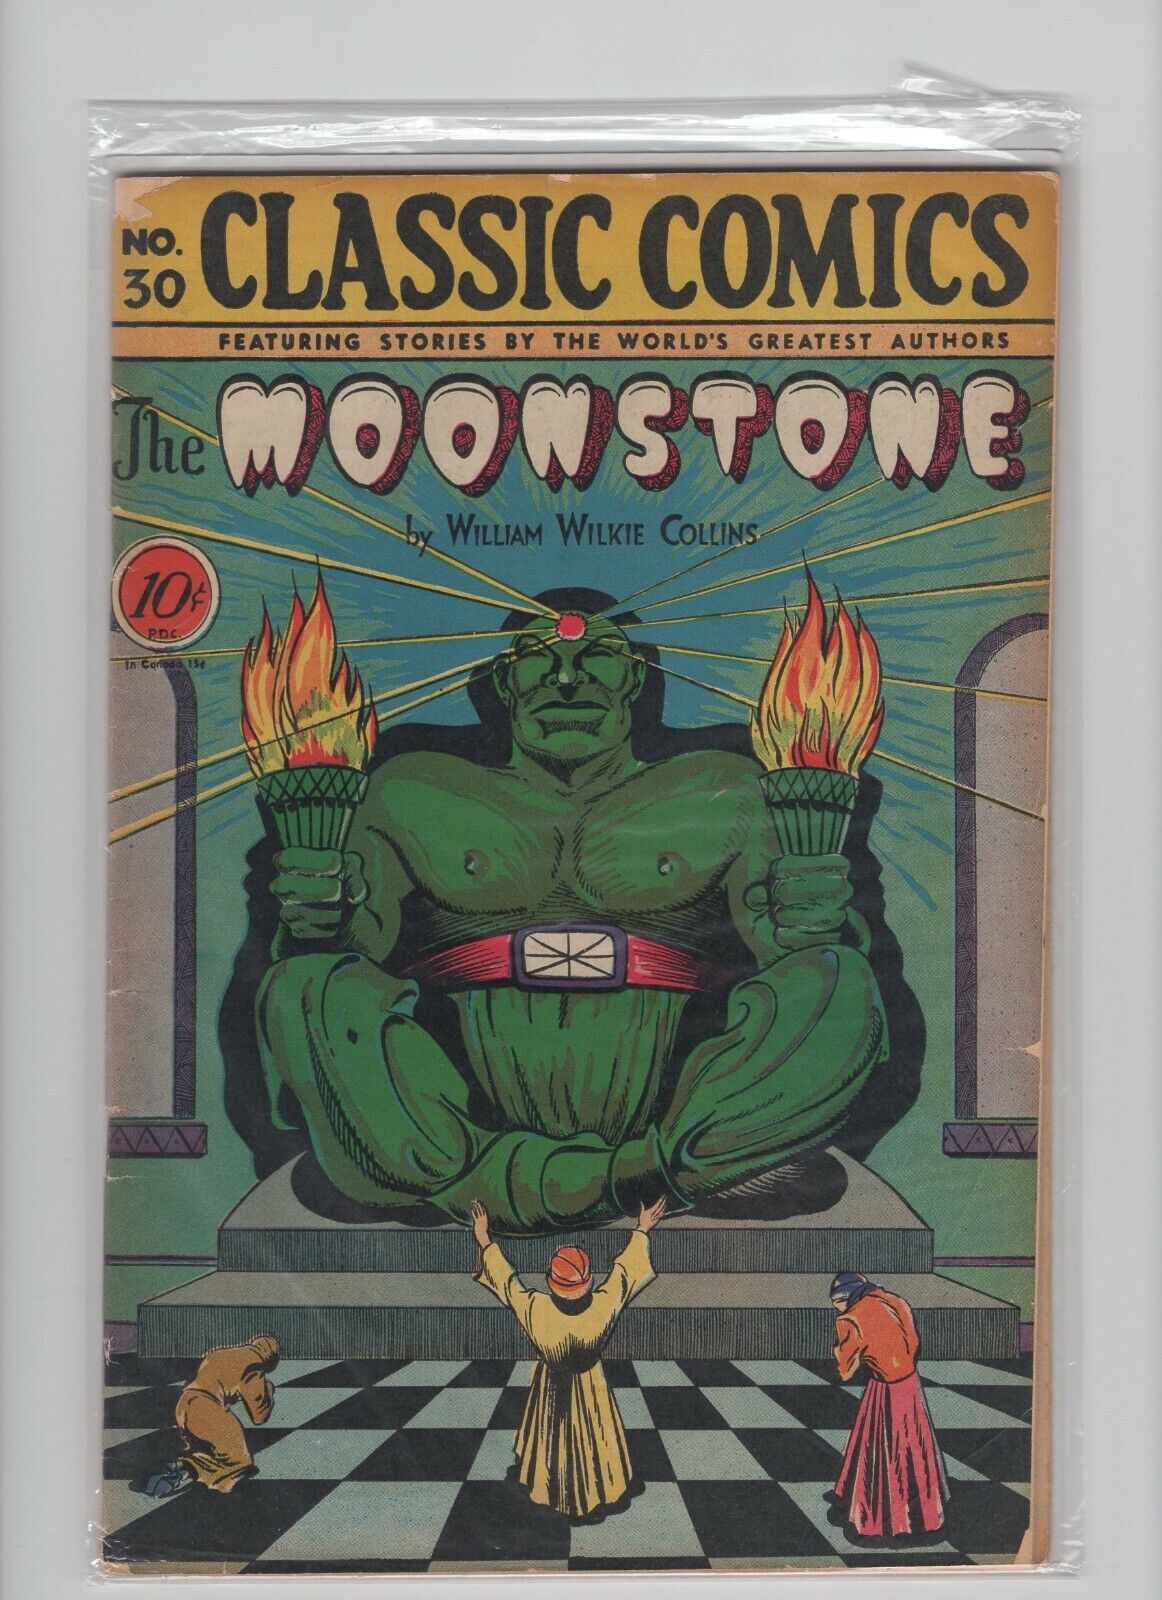 Classic Comics #30. The Moonstone HRN 30, a FINE Collectible.